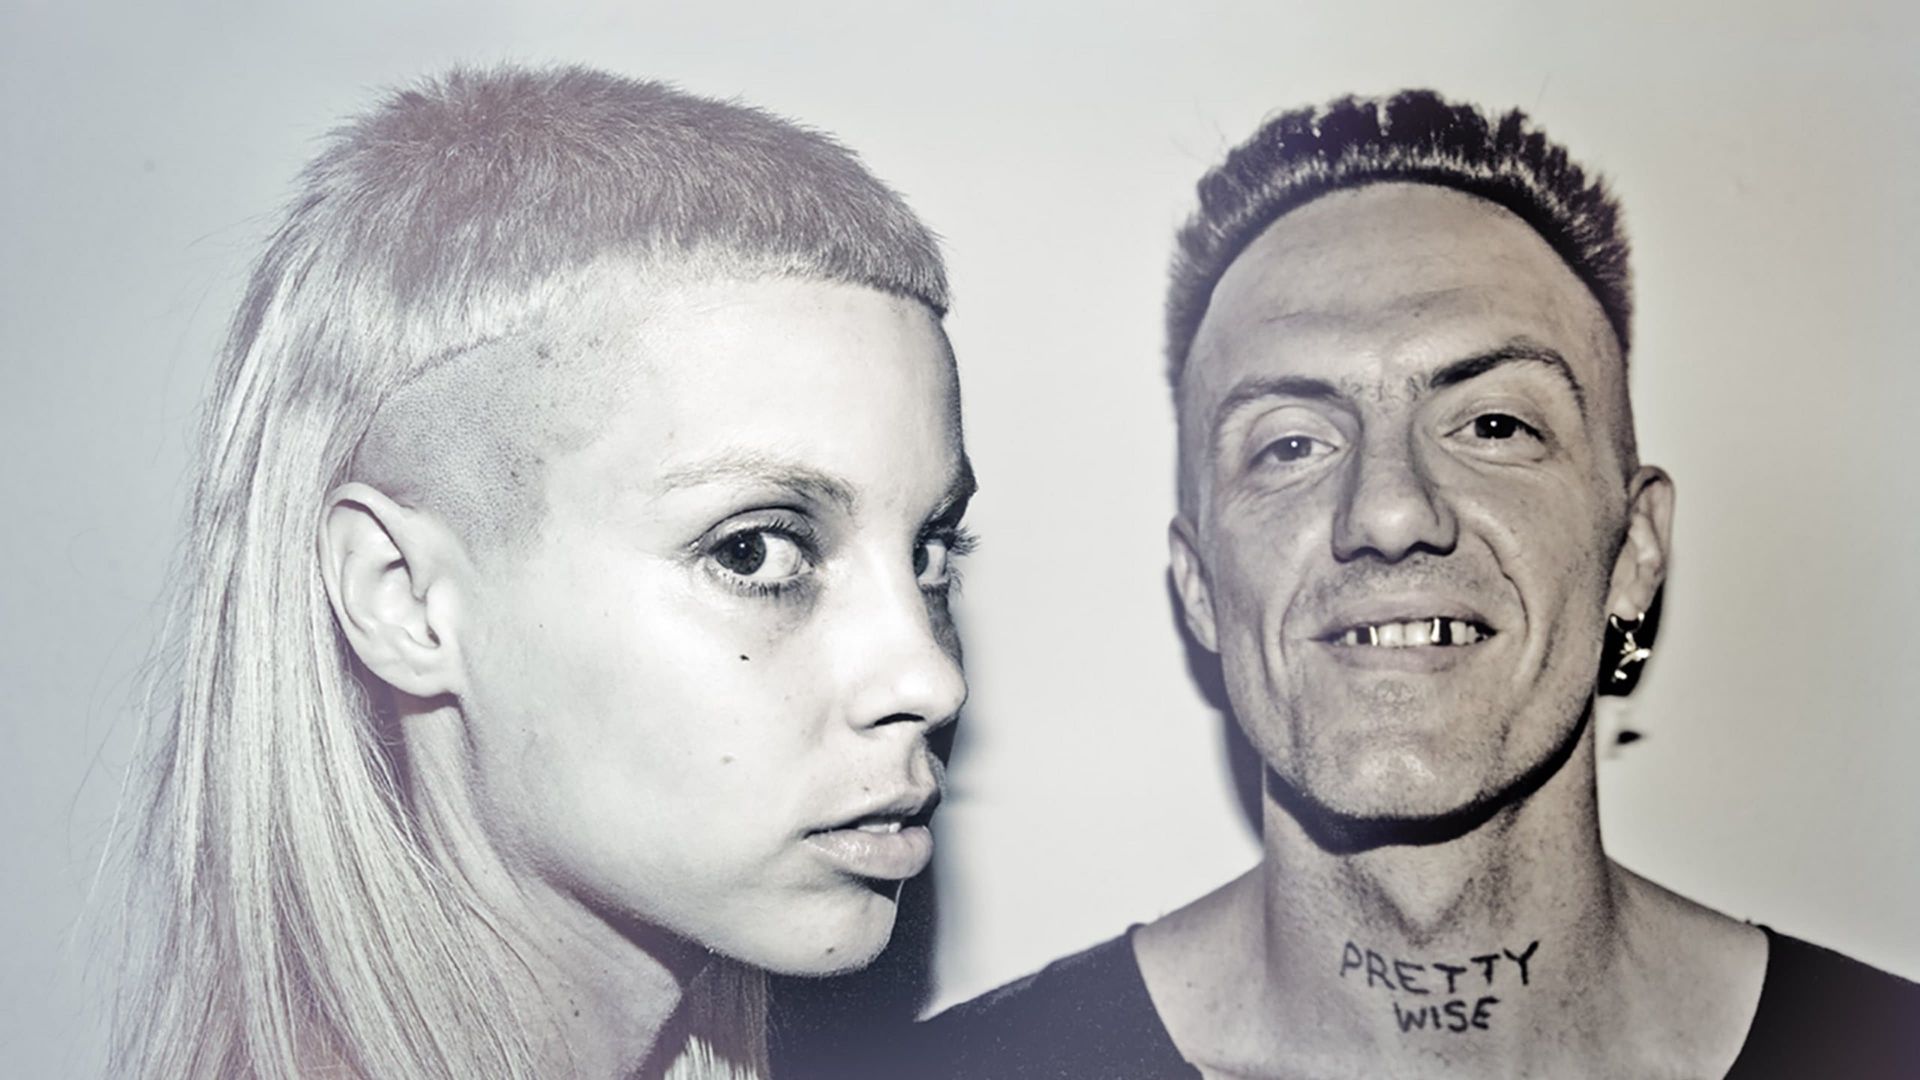 ZEF - The story of Die Antwoord background